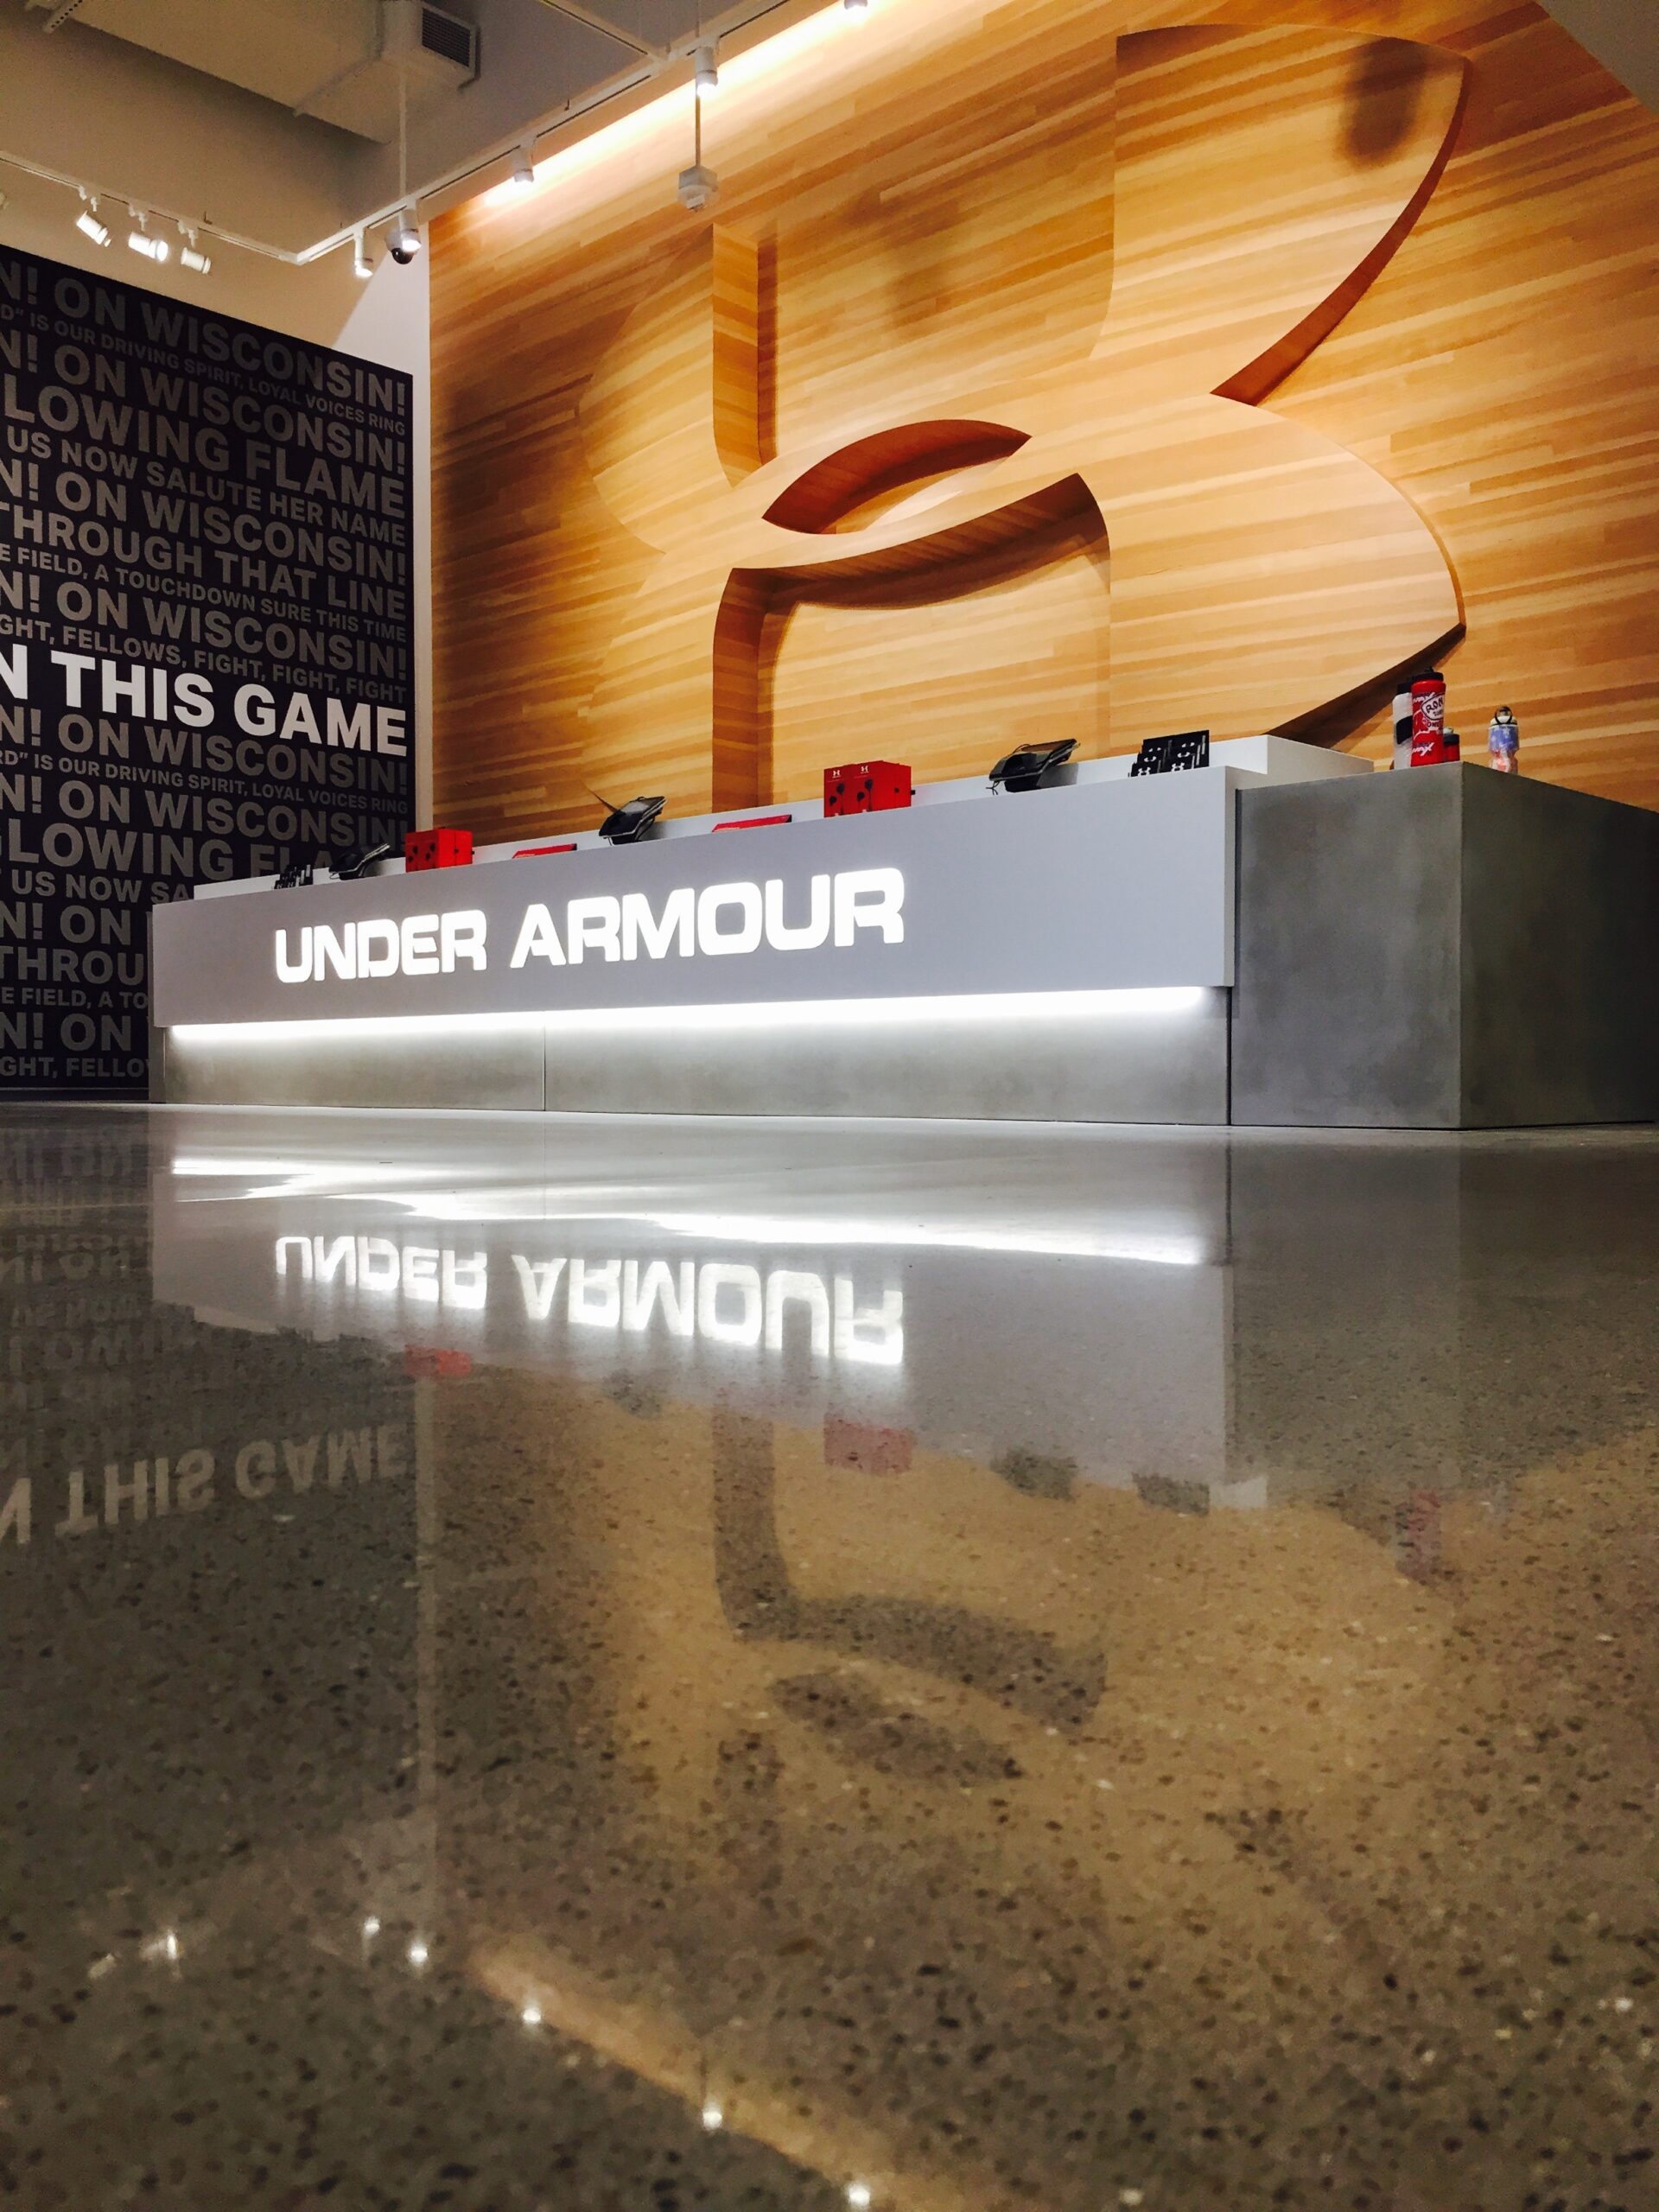 National Polishing TRU PC Job in Madison, WI at Under Armour